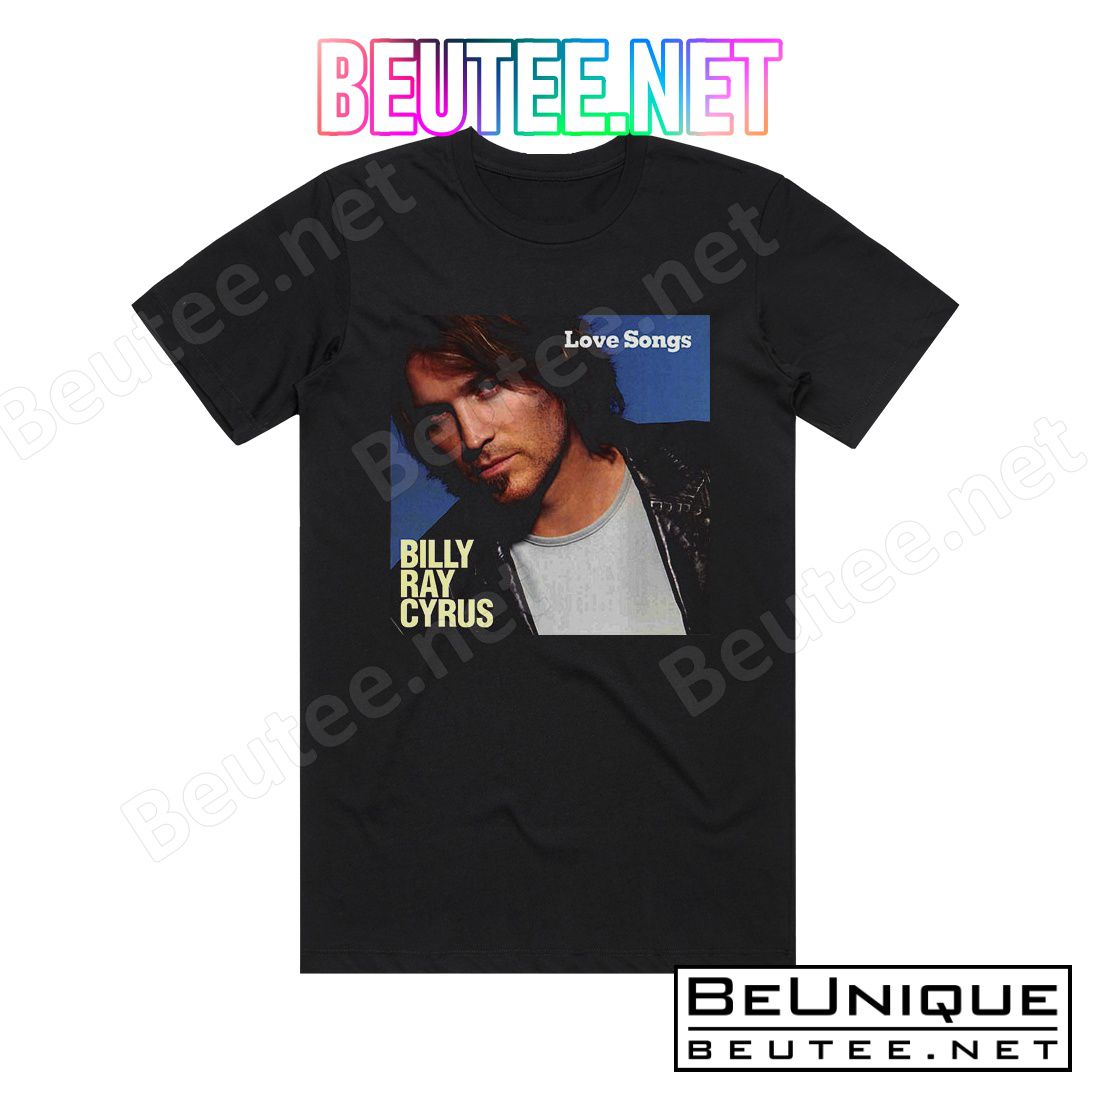 Billy Ray Cyrus Love Songs Album Cover T-Shirt